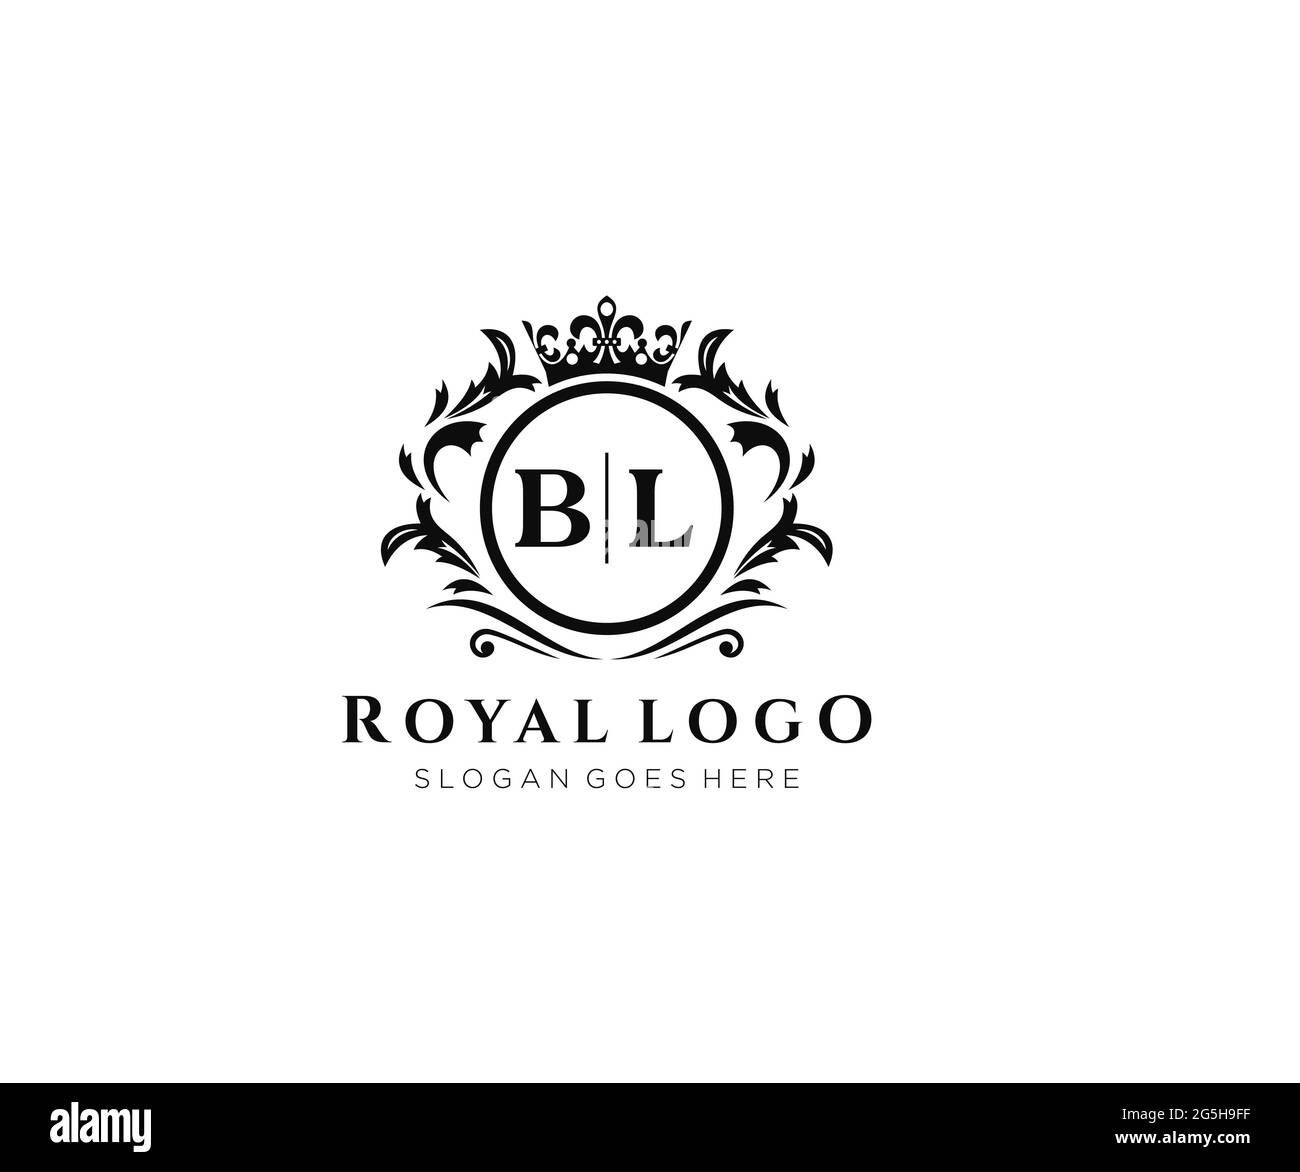 BL Letter Luxurious Brand Logo Template, for Restaurant, Royalty, Boutique, Cafe, Hotel, Heraldic, Jewelry, Fashion and other vector illustration. Stock Vector